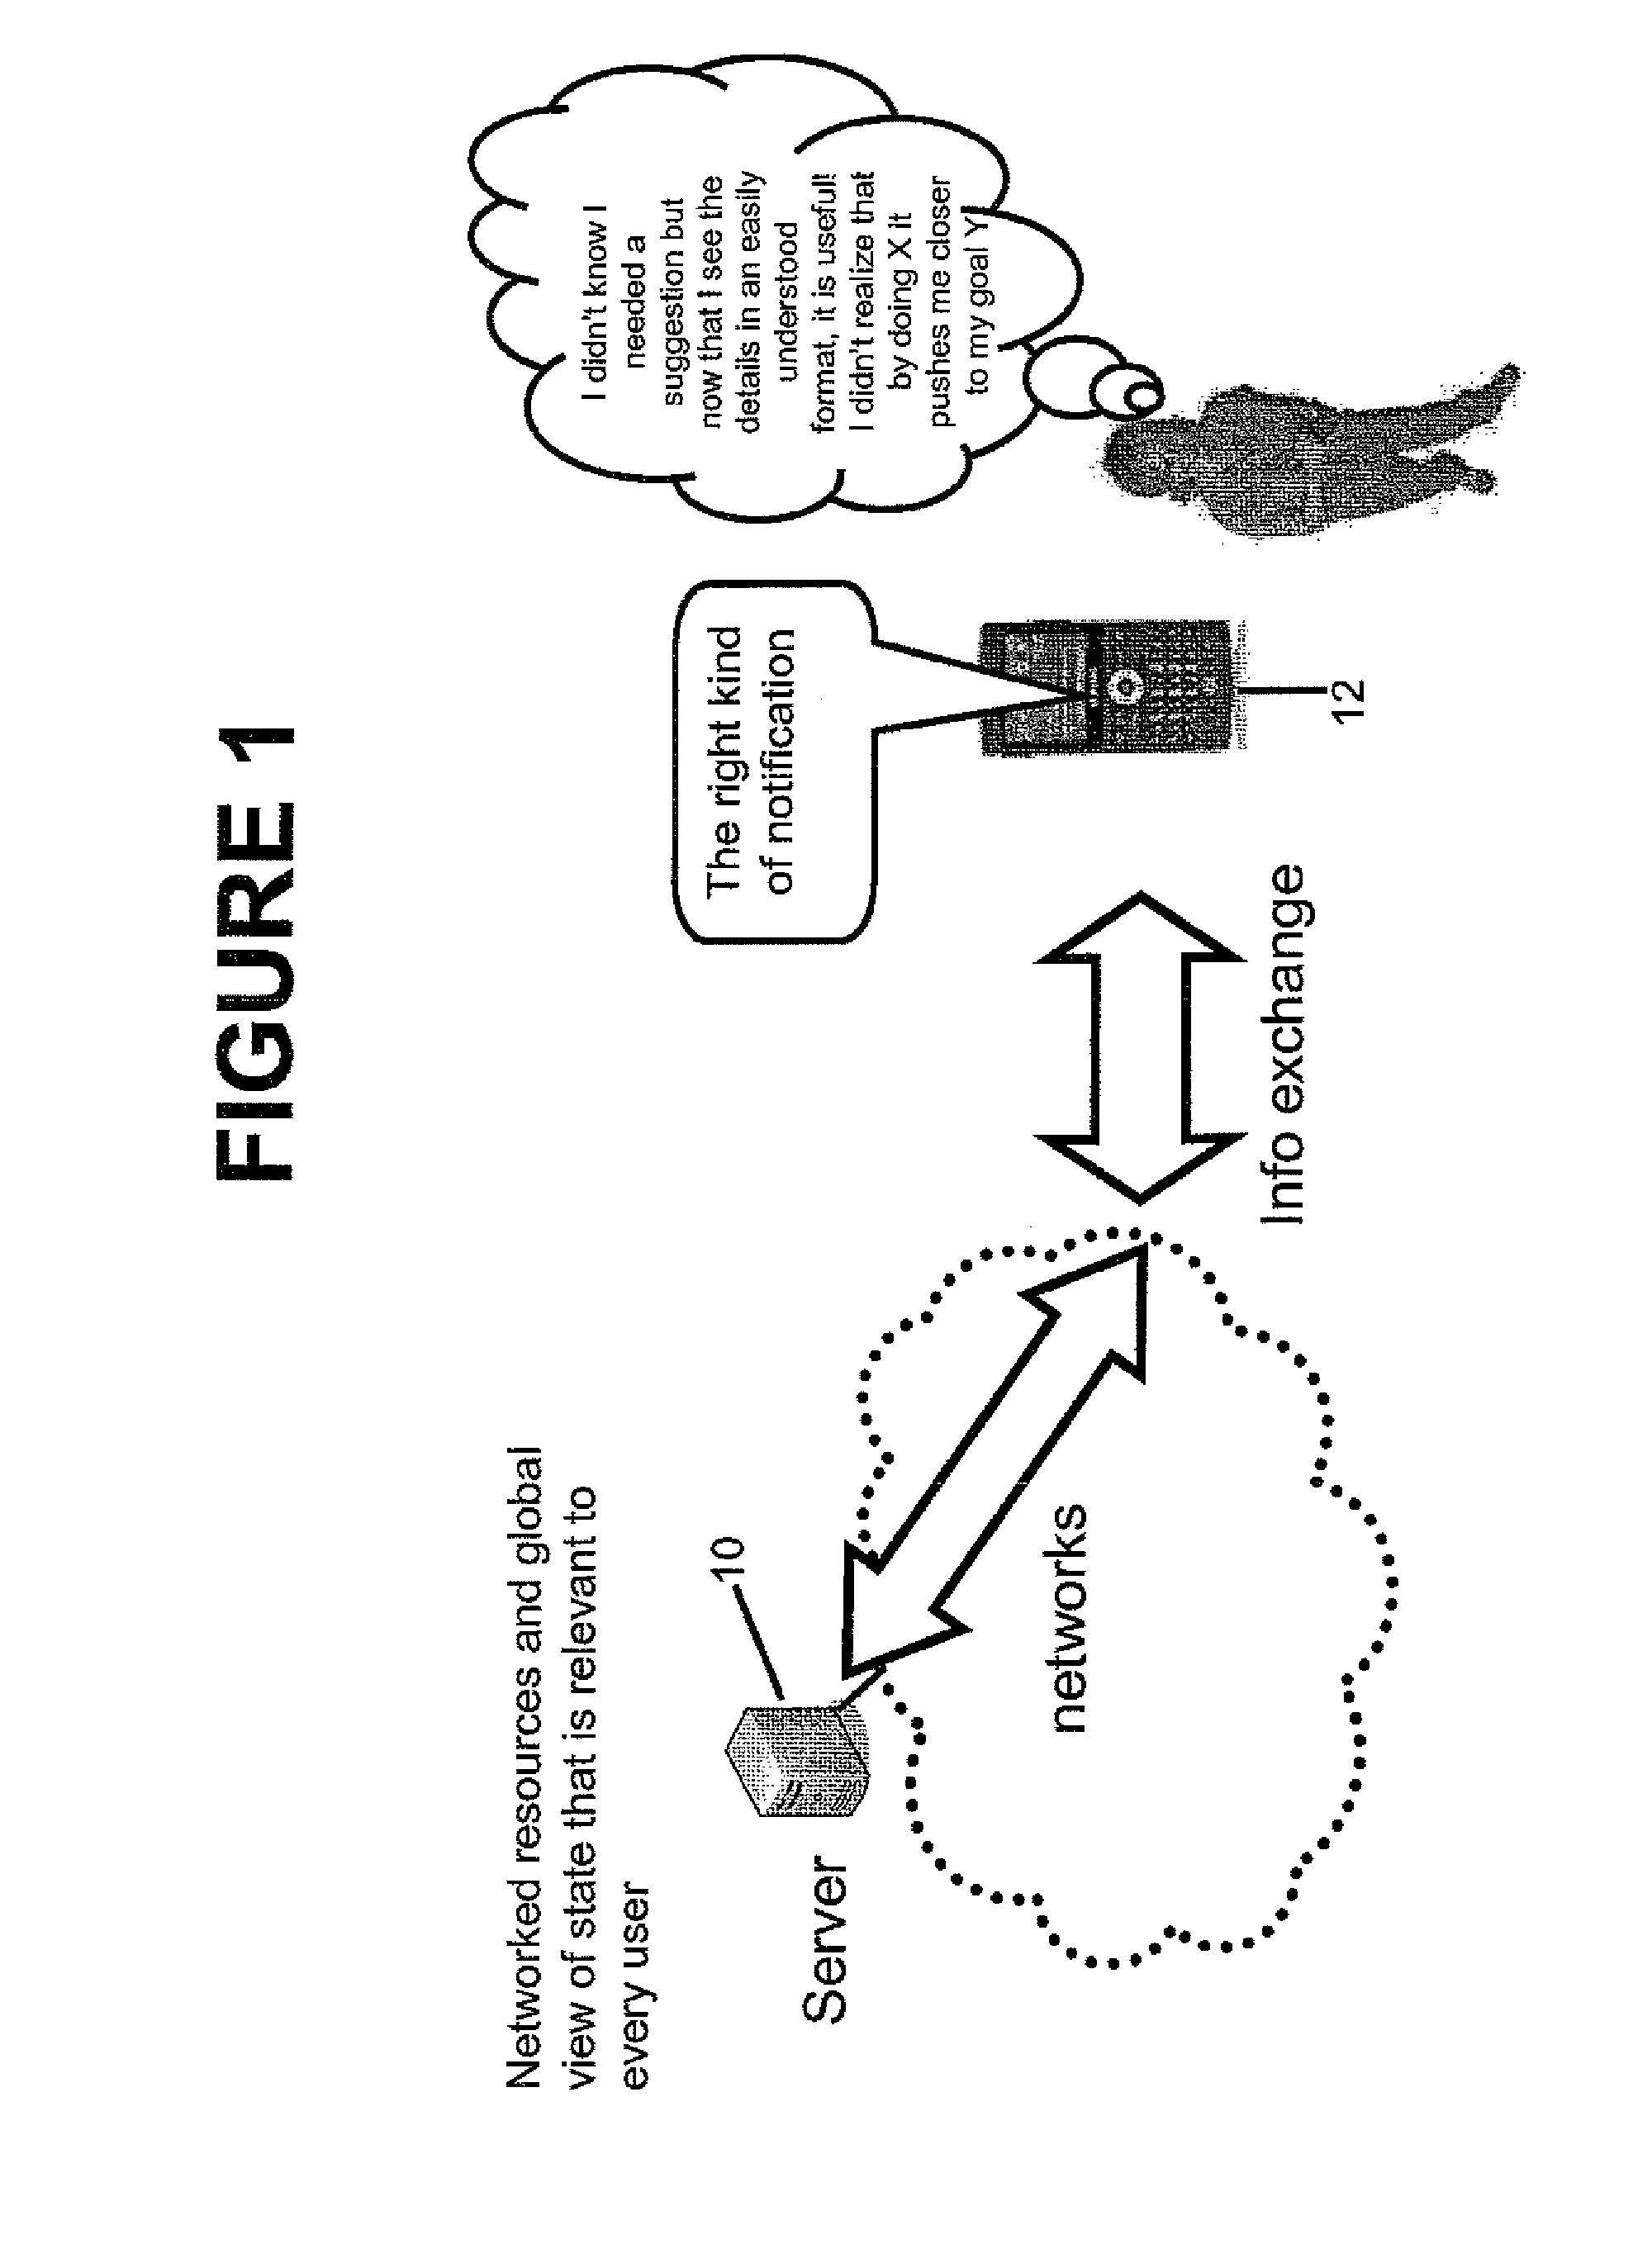 Method and System for Mashing Up and Presenting Contextual Suggestions to Mobile Users